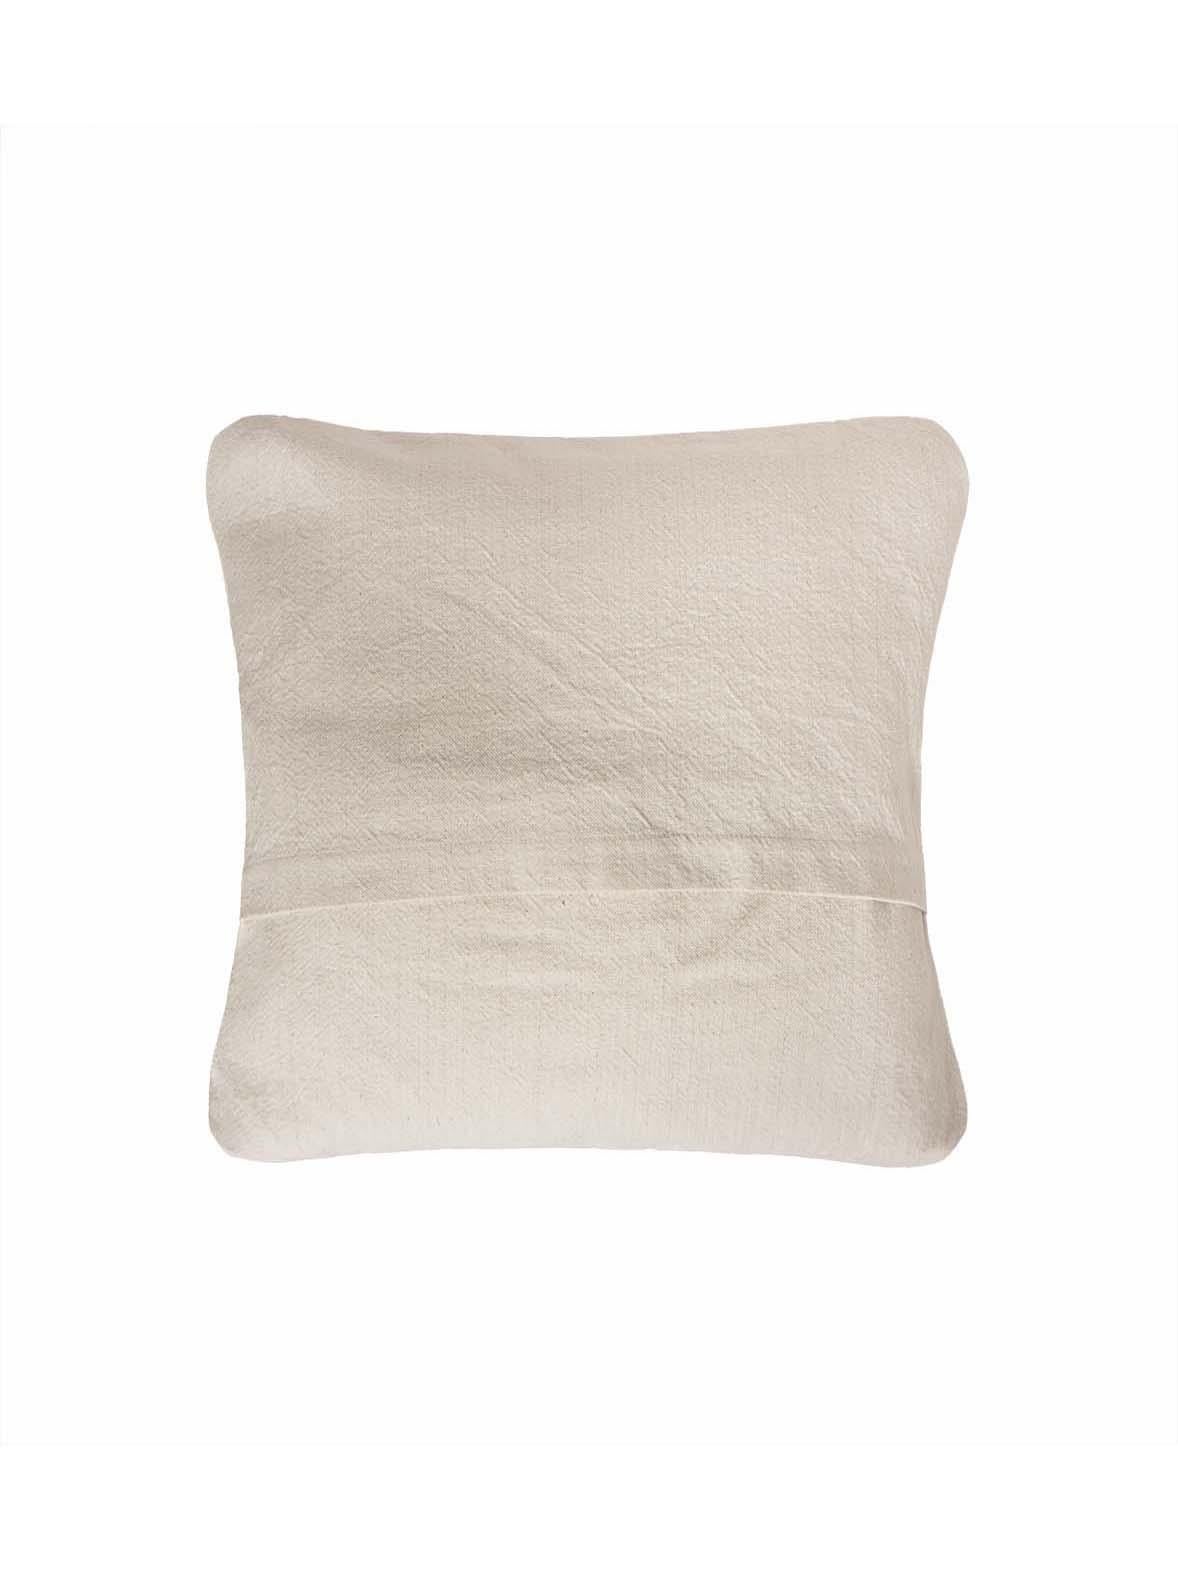 Hand-Woven Off-White Cushion Cover, made of Handspun and Handwoven wool For Sale